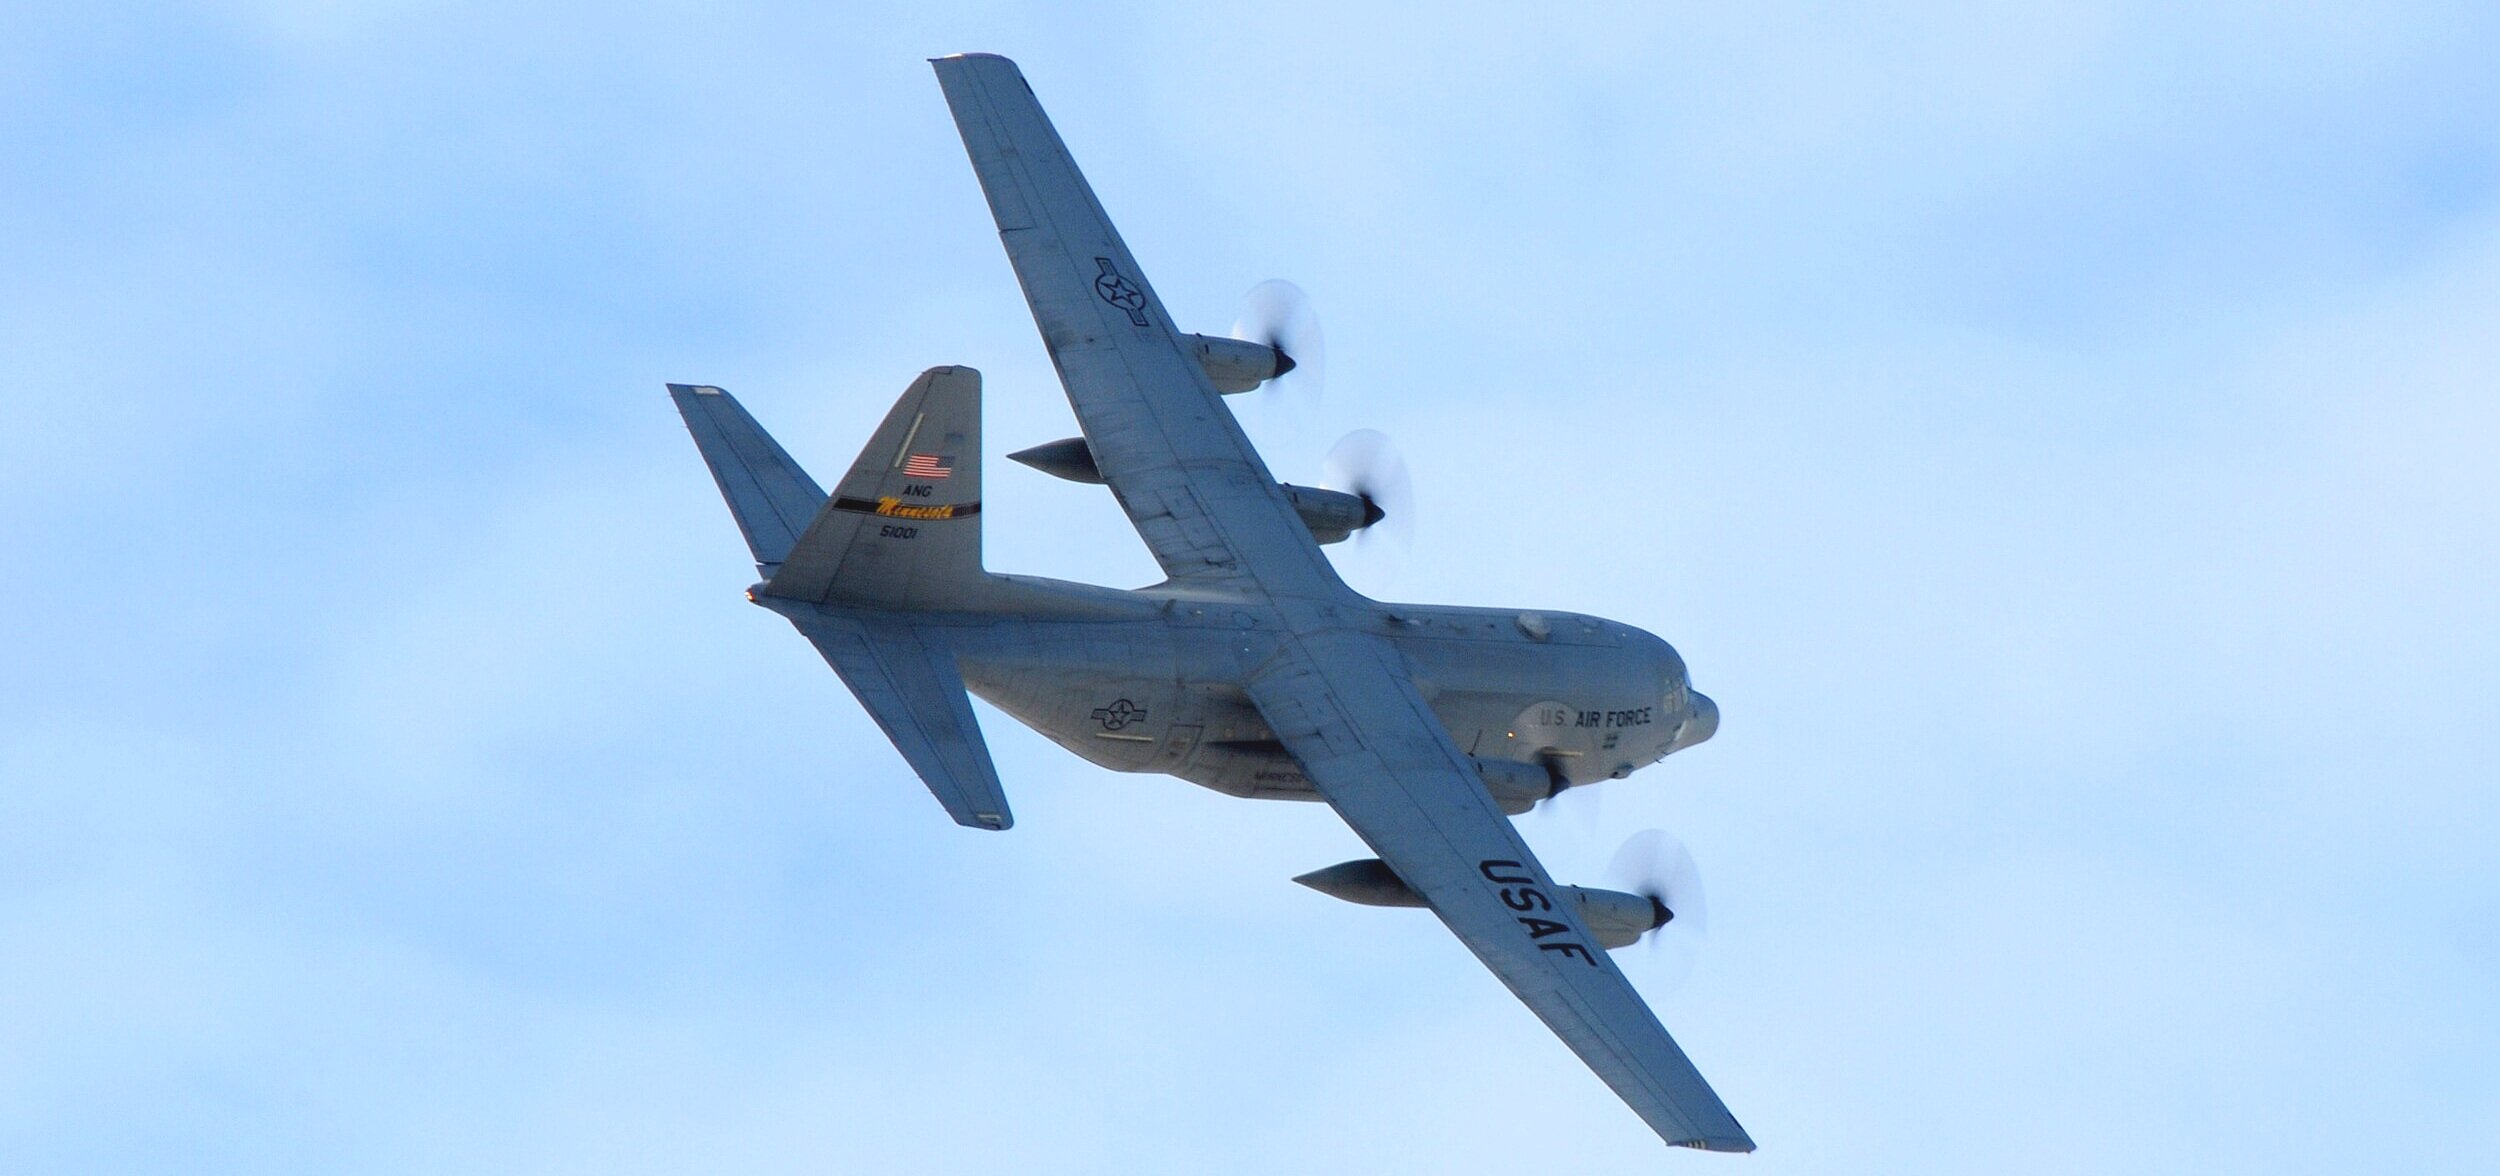 C-130_Hercules_of_the_133rd_Airlift_Wing_flying_over_Minneapolis_St._Paul_International_Airport.jpg